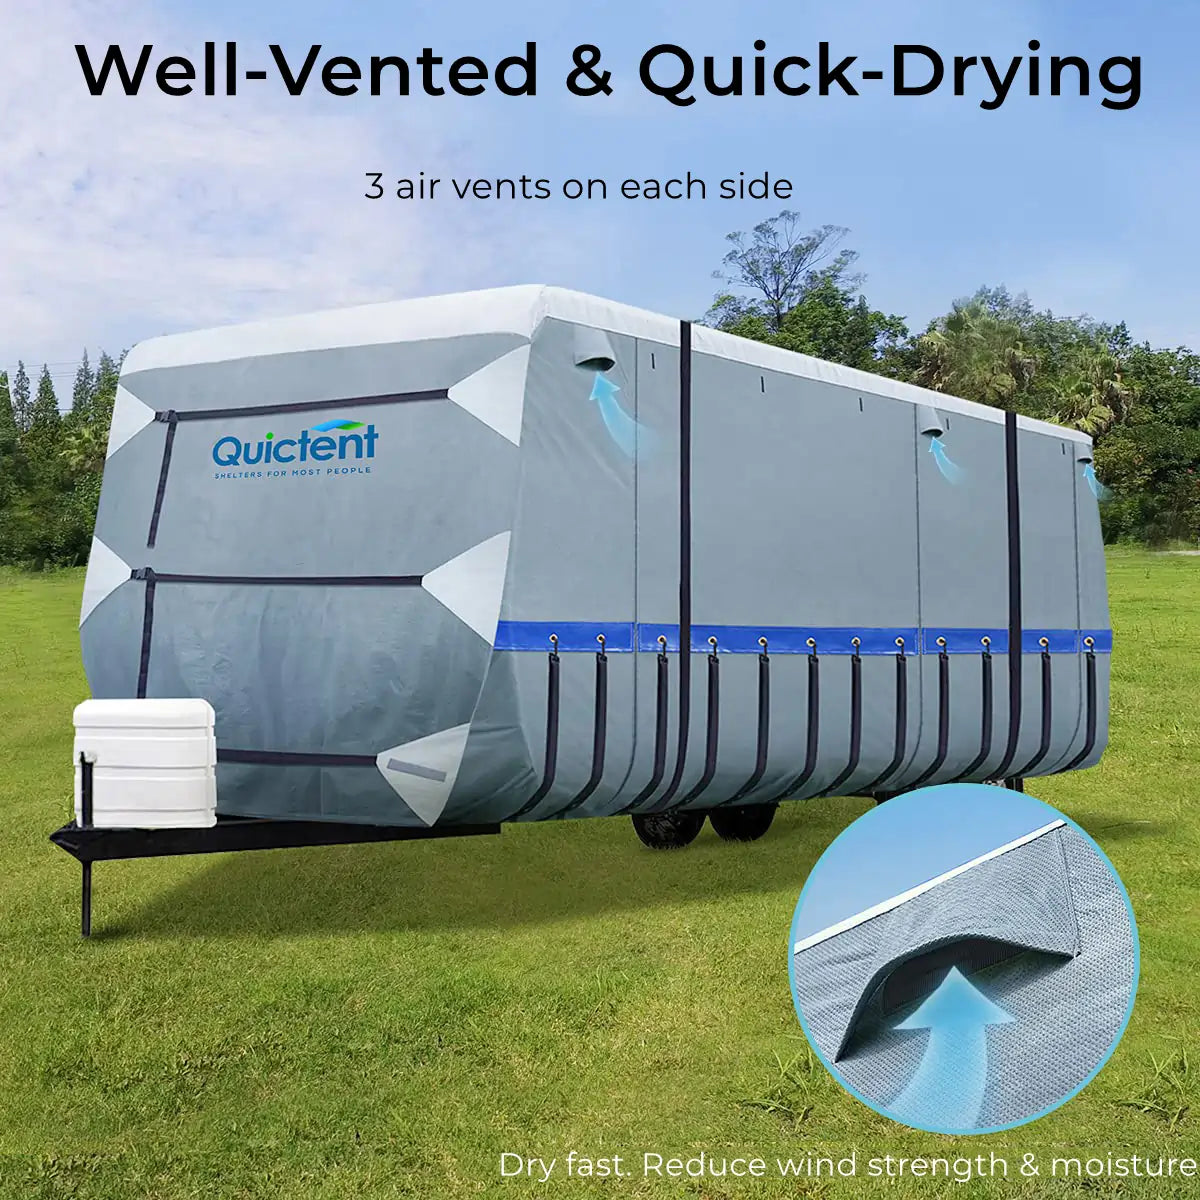 Quick drying Travel Trailer Covers